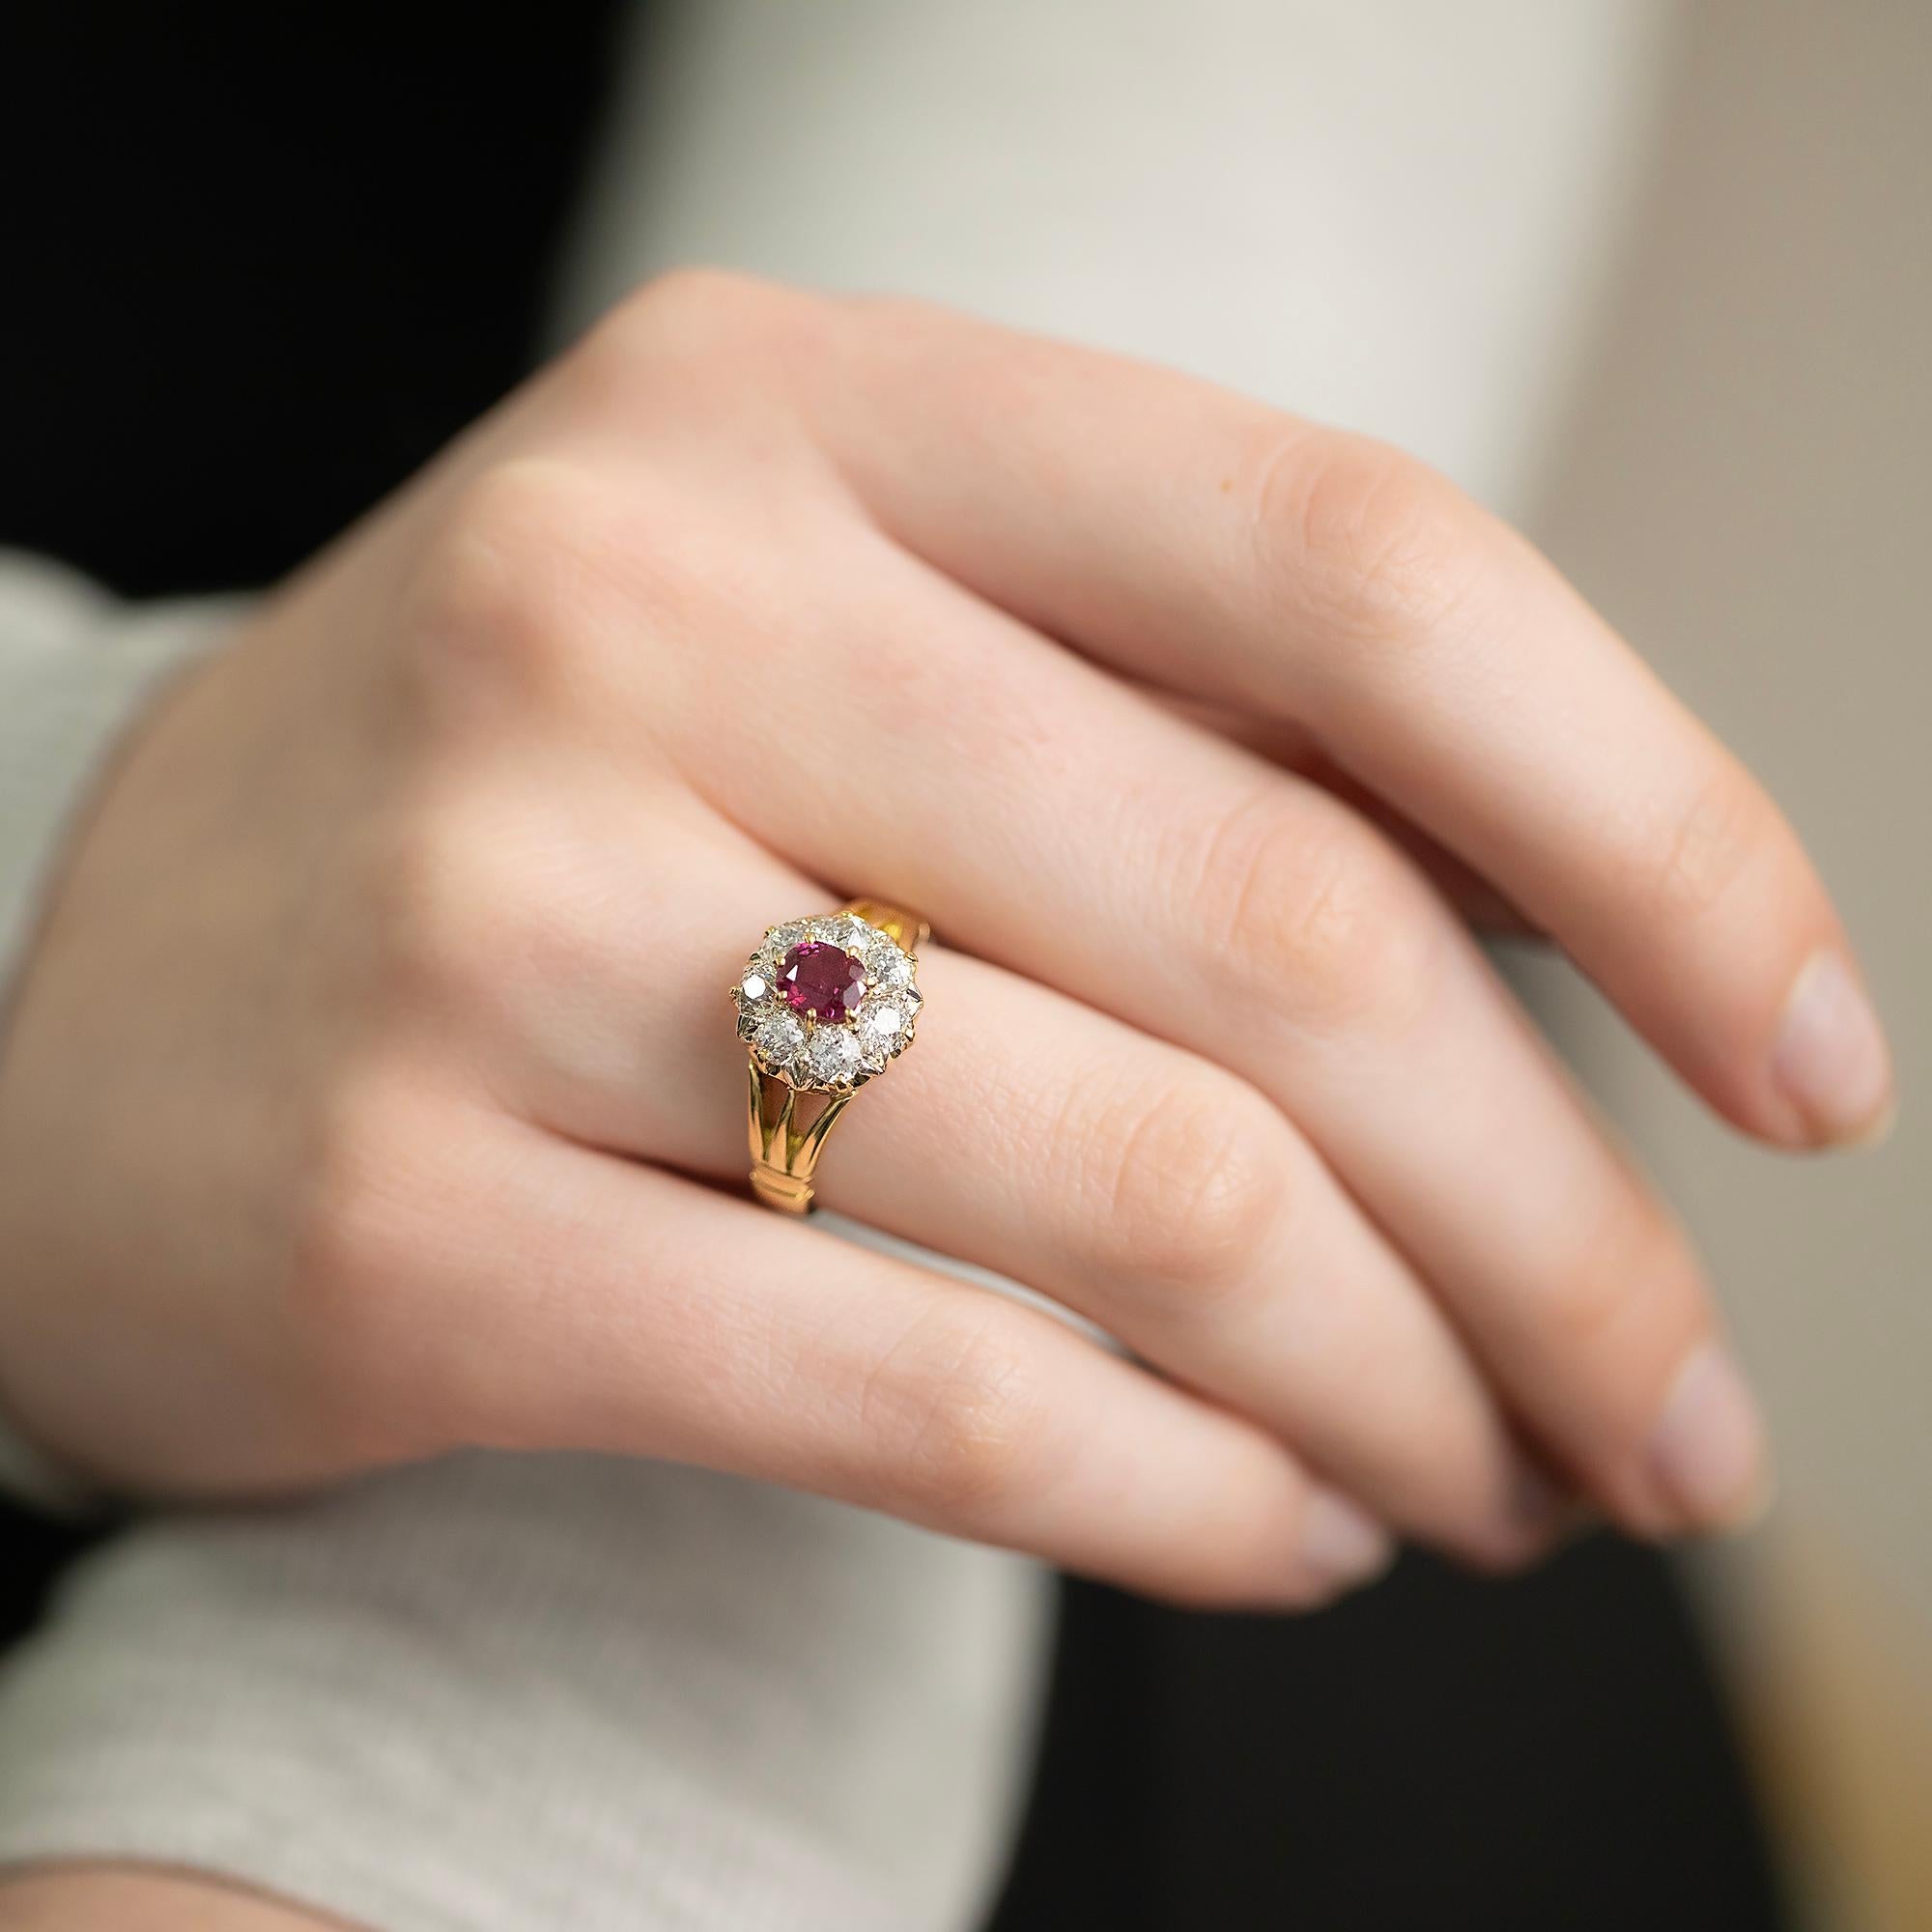 An Edwardian style reproduction ruby and diamond scalloped cluster ring with split shoulders. Featuring an oval ruby surrounded by early =European diamonds.

Gemstones: One oval cut natural ruby, good mid-red material, 5.50mm x 4.44mm x 2.92mm,